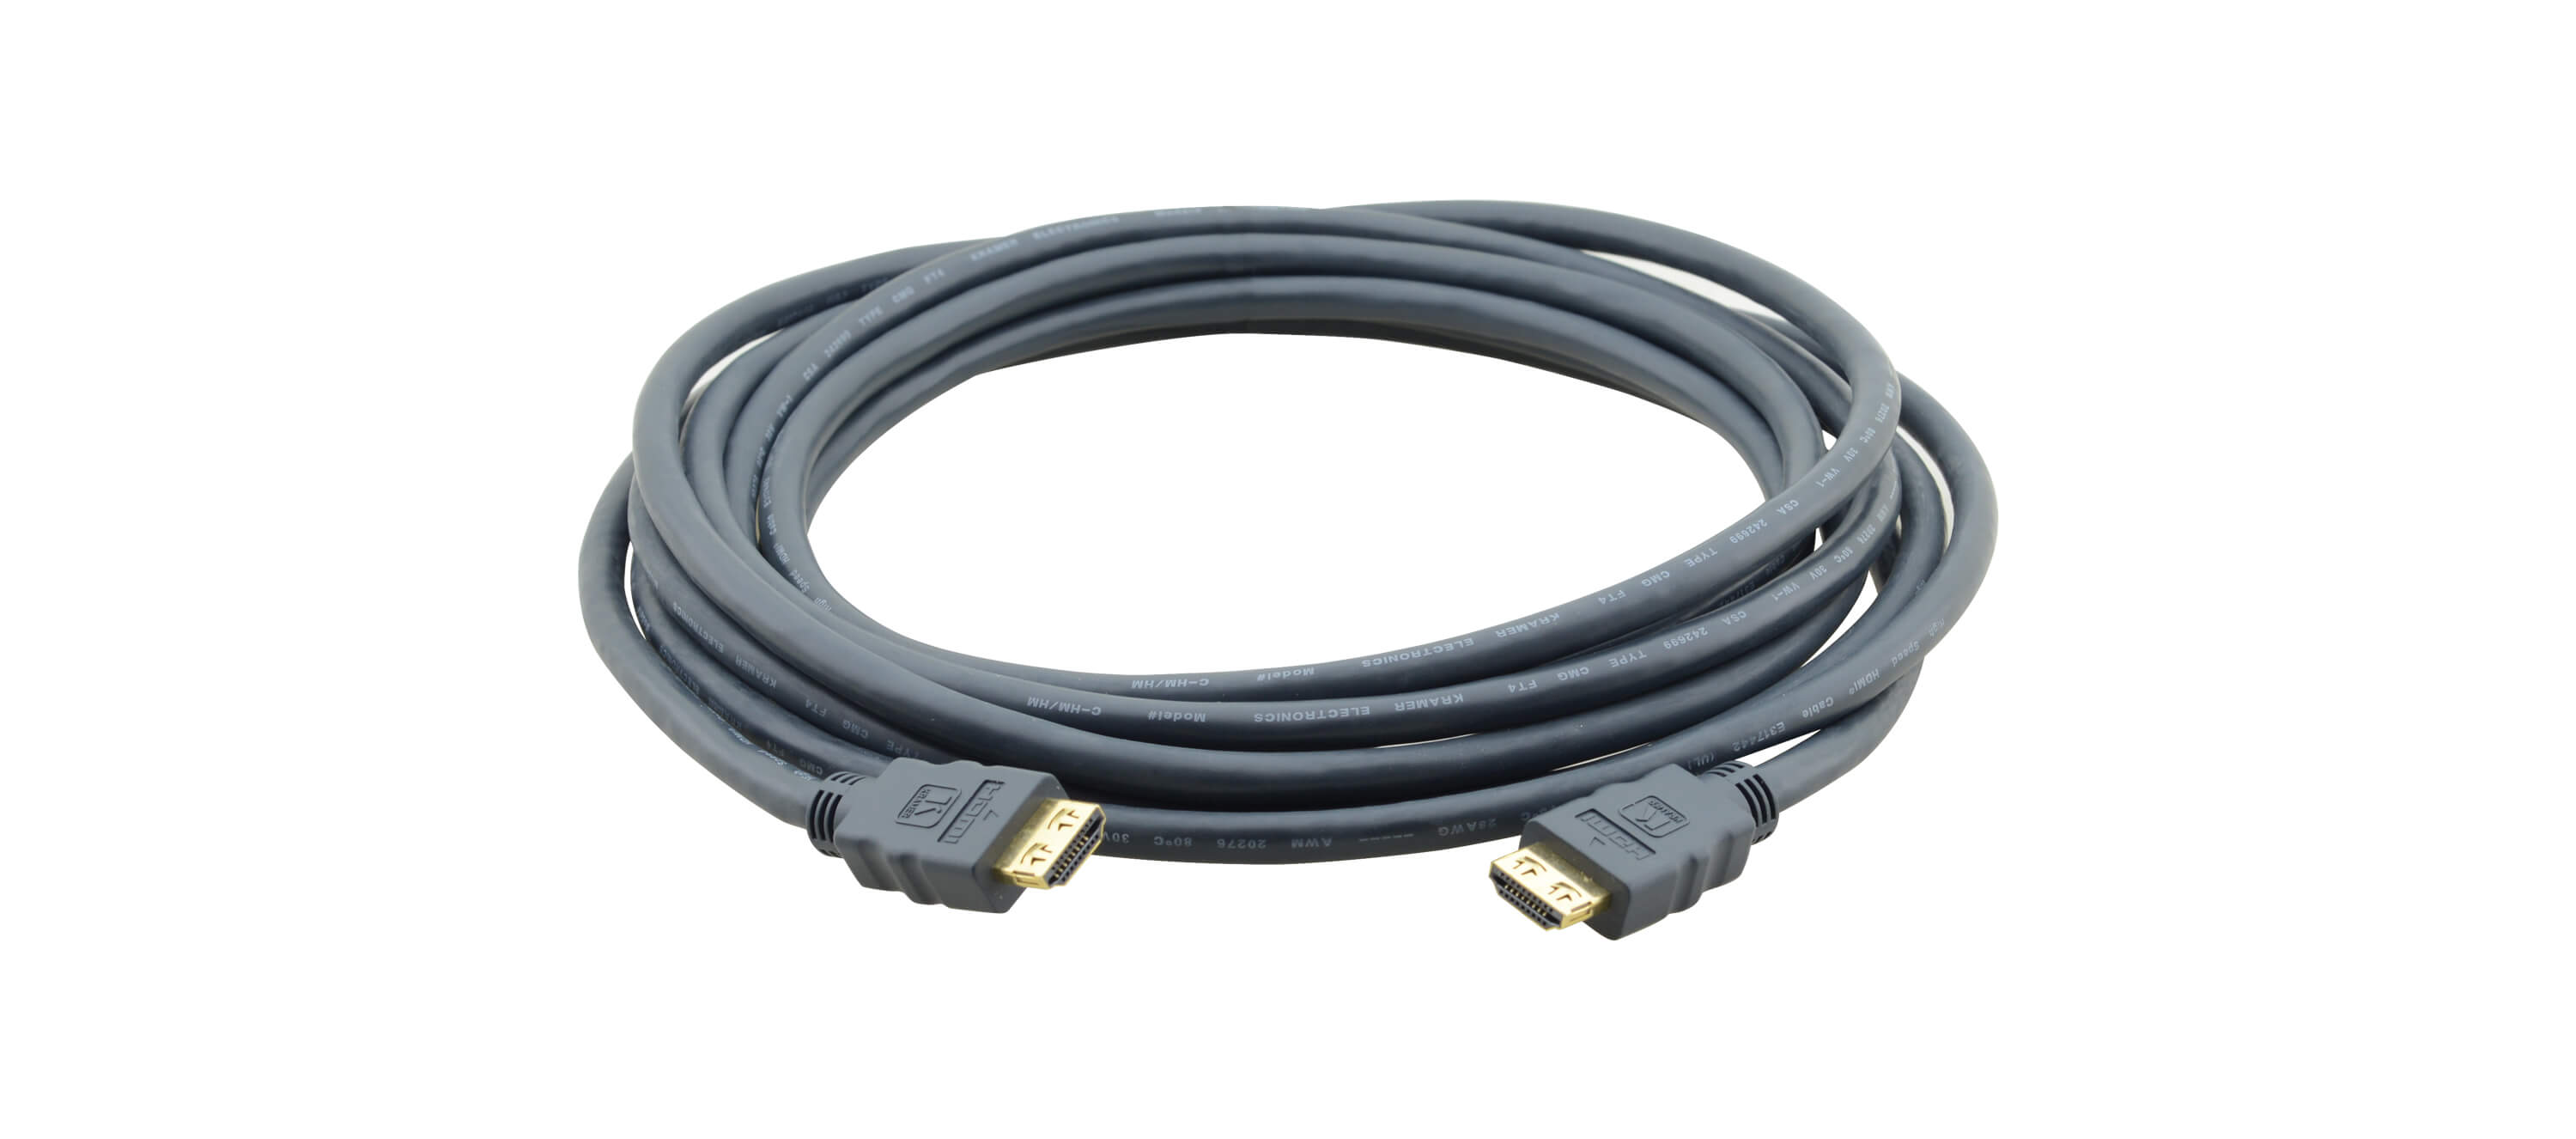 C-HM/HM/ETH-50 High–Speed HDMI Cable with Ethernet 50'